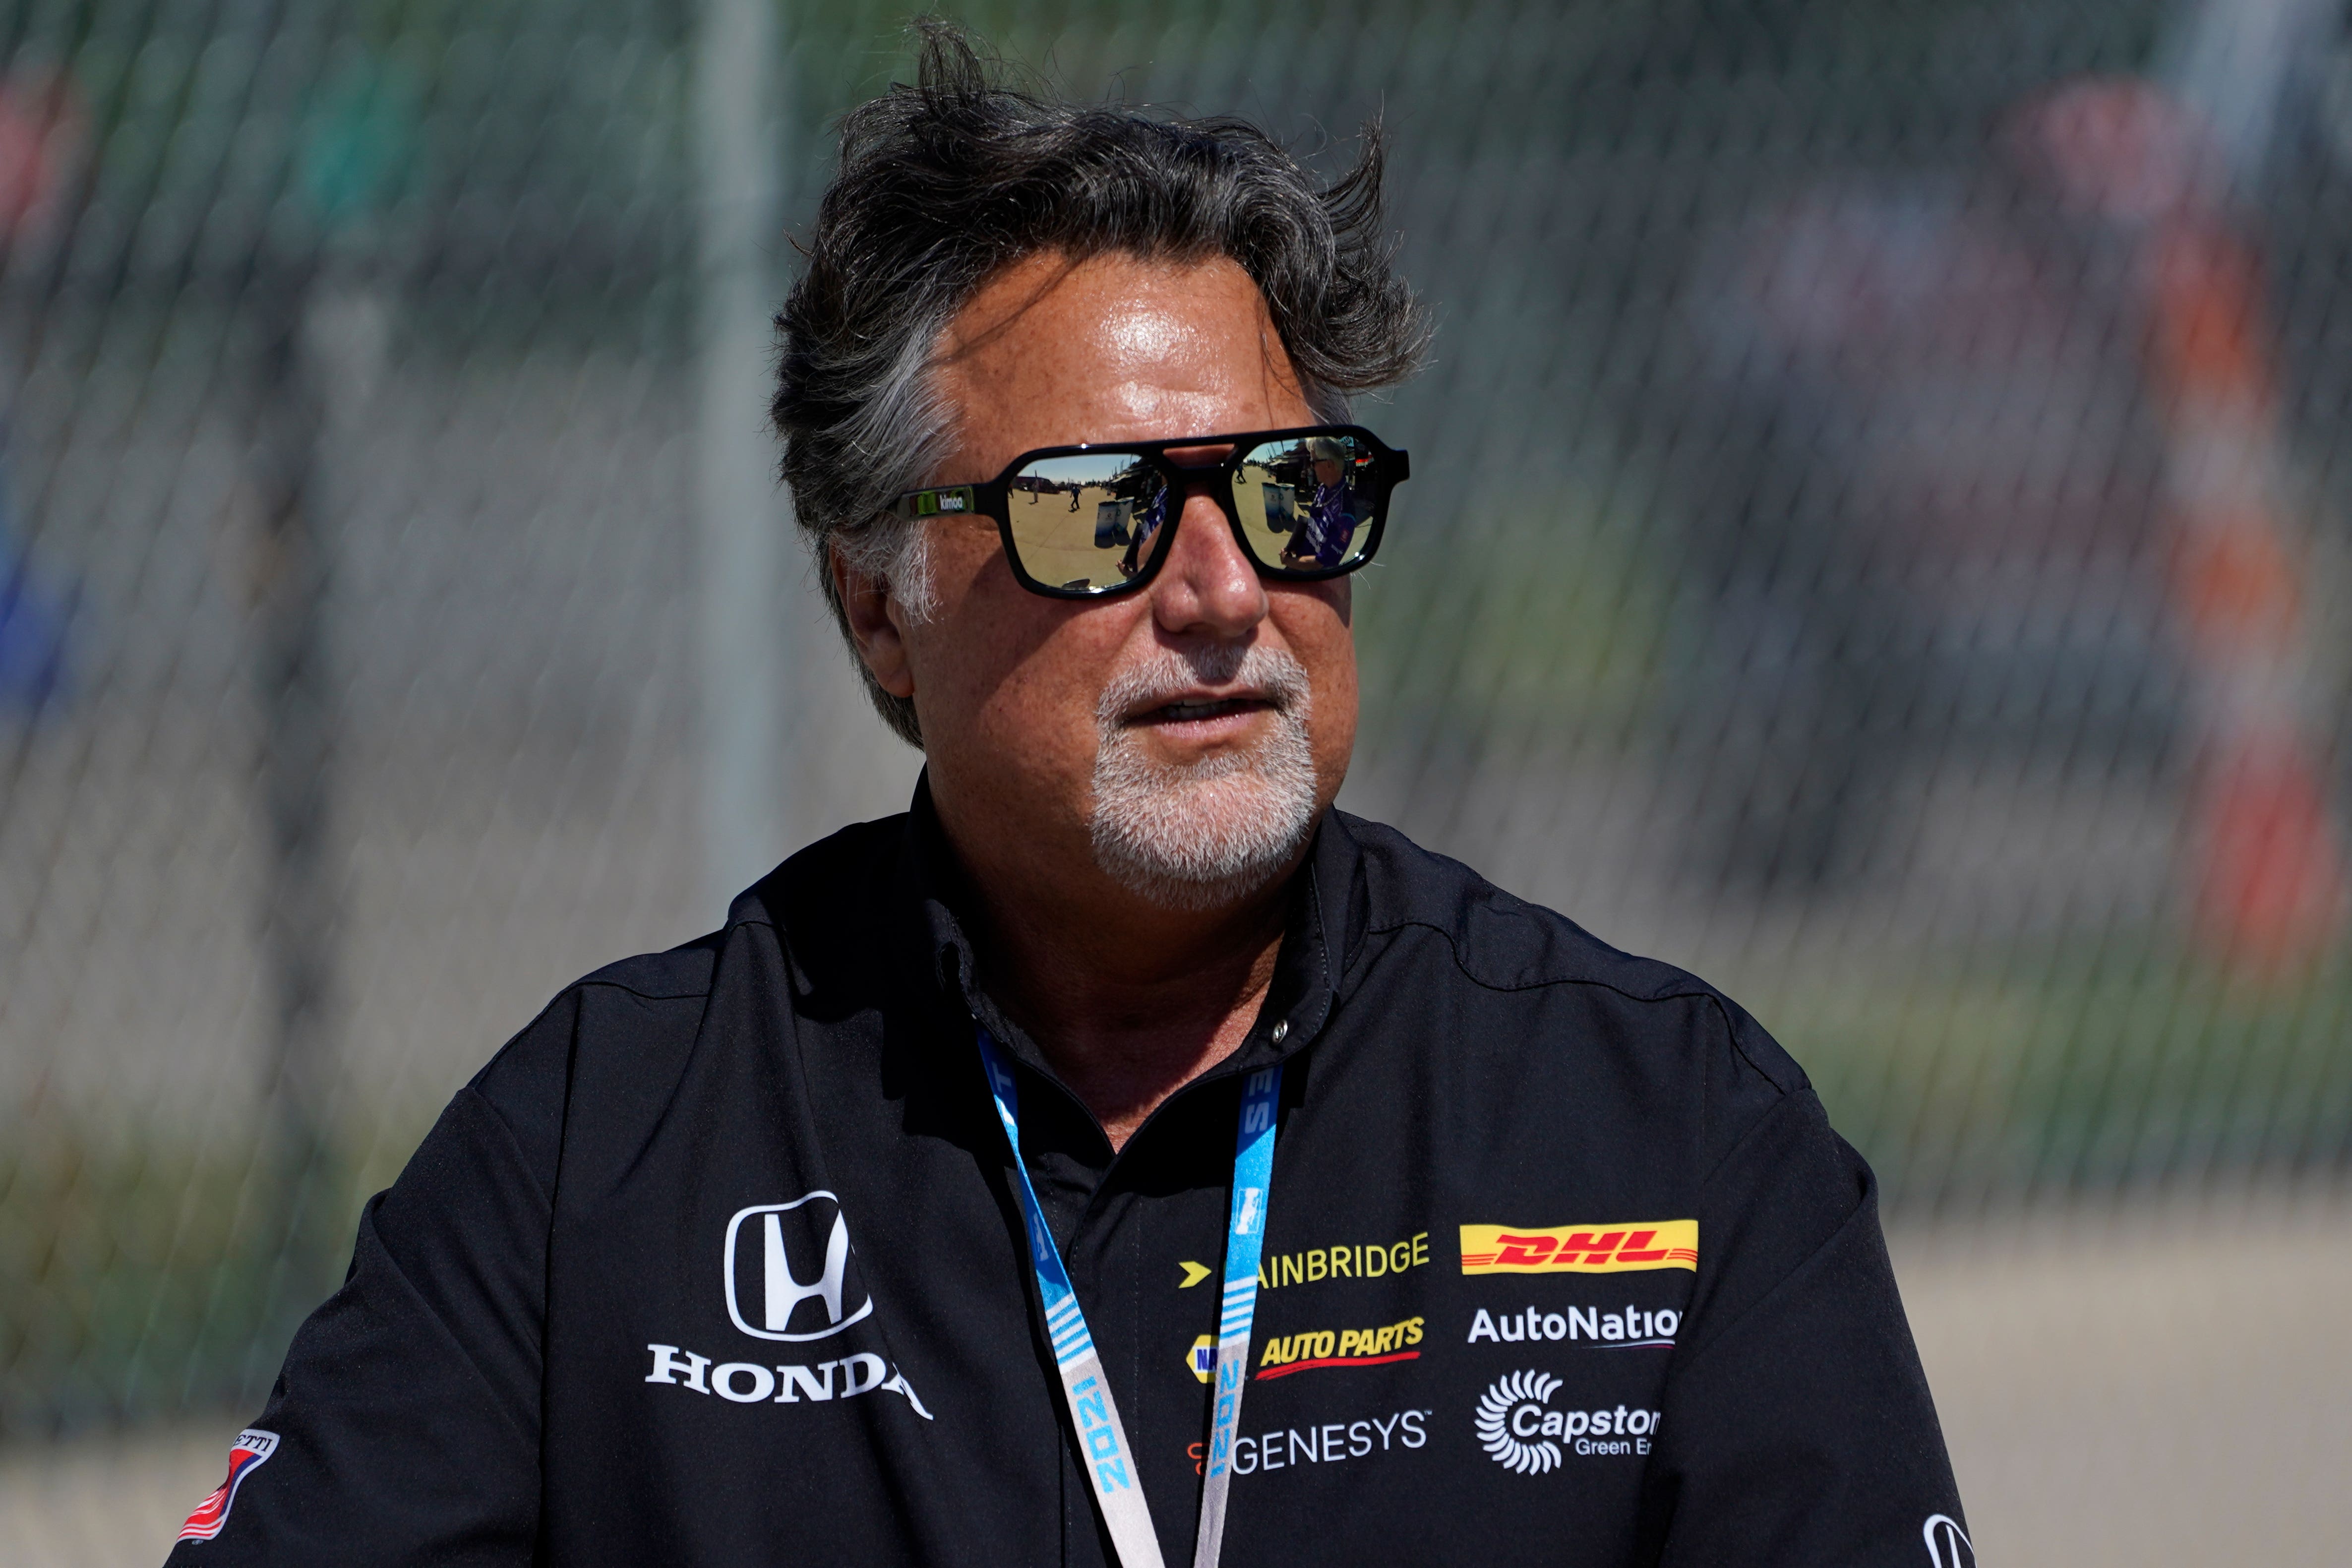 Michael Andretti (son of 1978 F1 world champion Mario Andretti) is looking to enter a team into Formula 1